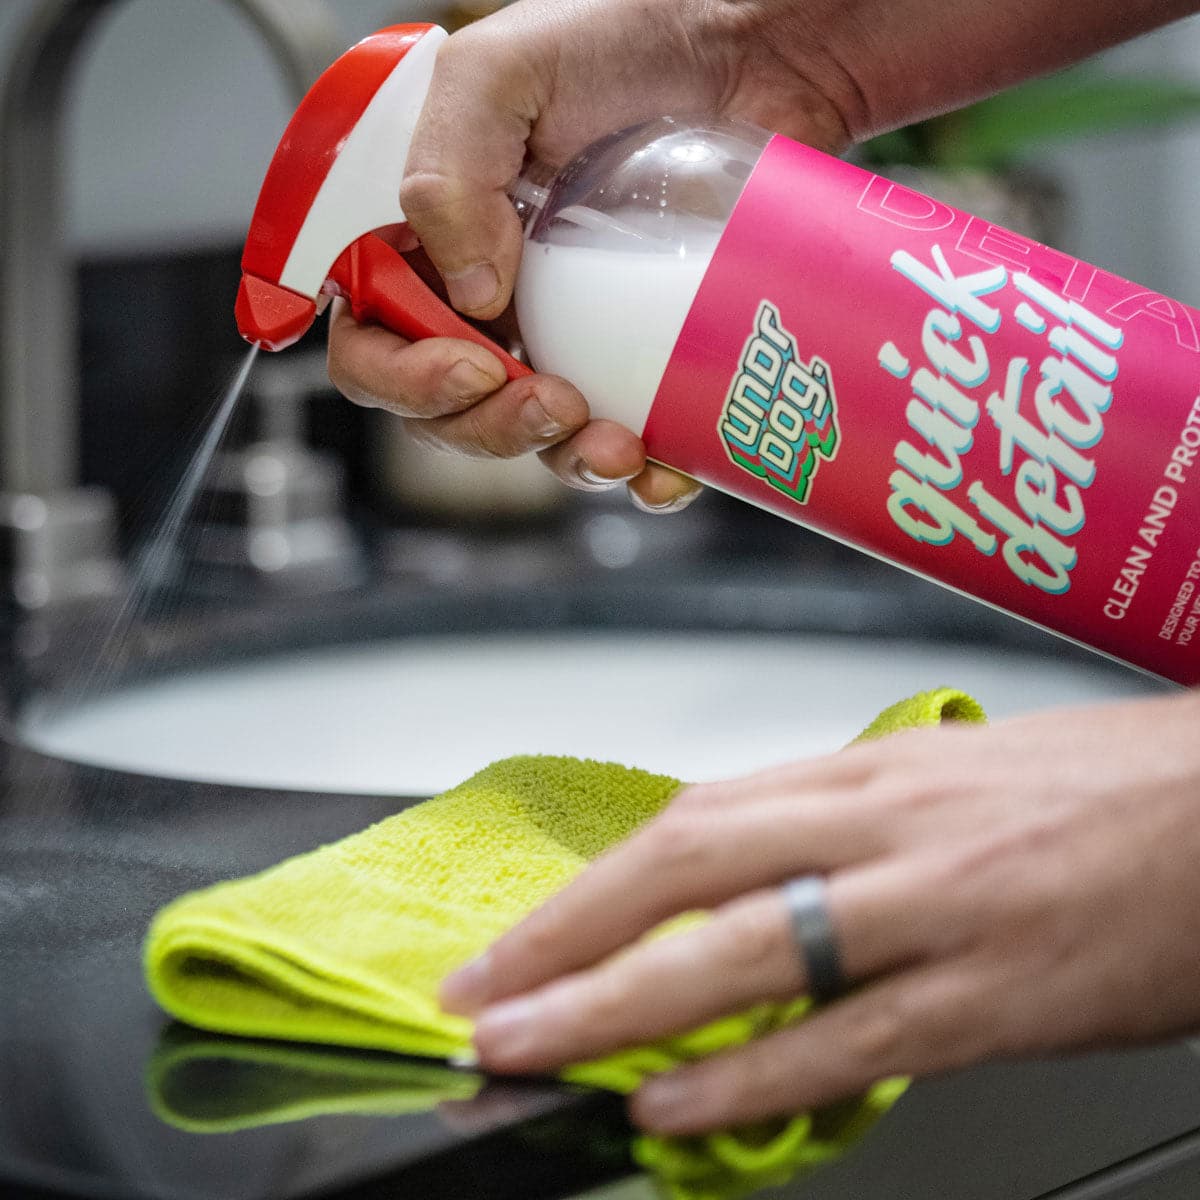 quick-detail-alt2_1c77976c-cef2-453b-8c0d-91c50bd5875e.jpg - Rethink Car Wax: Discover a Superior Shine with Quick Detail - Undrdog Surface Products